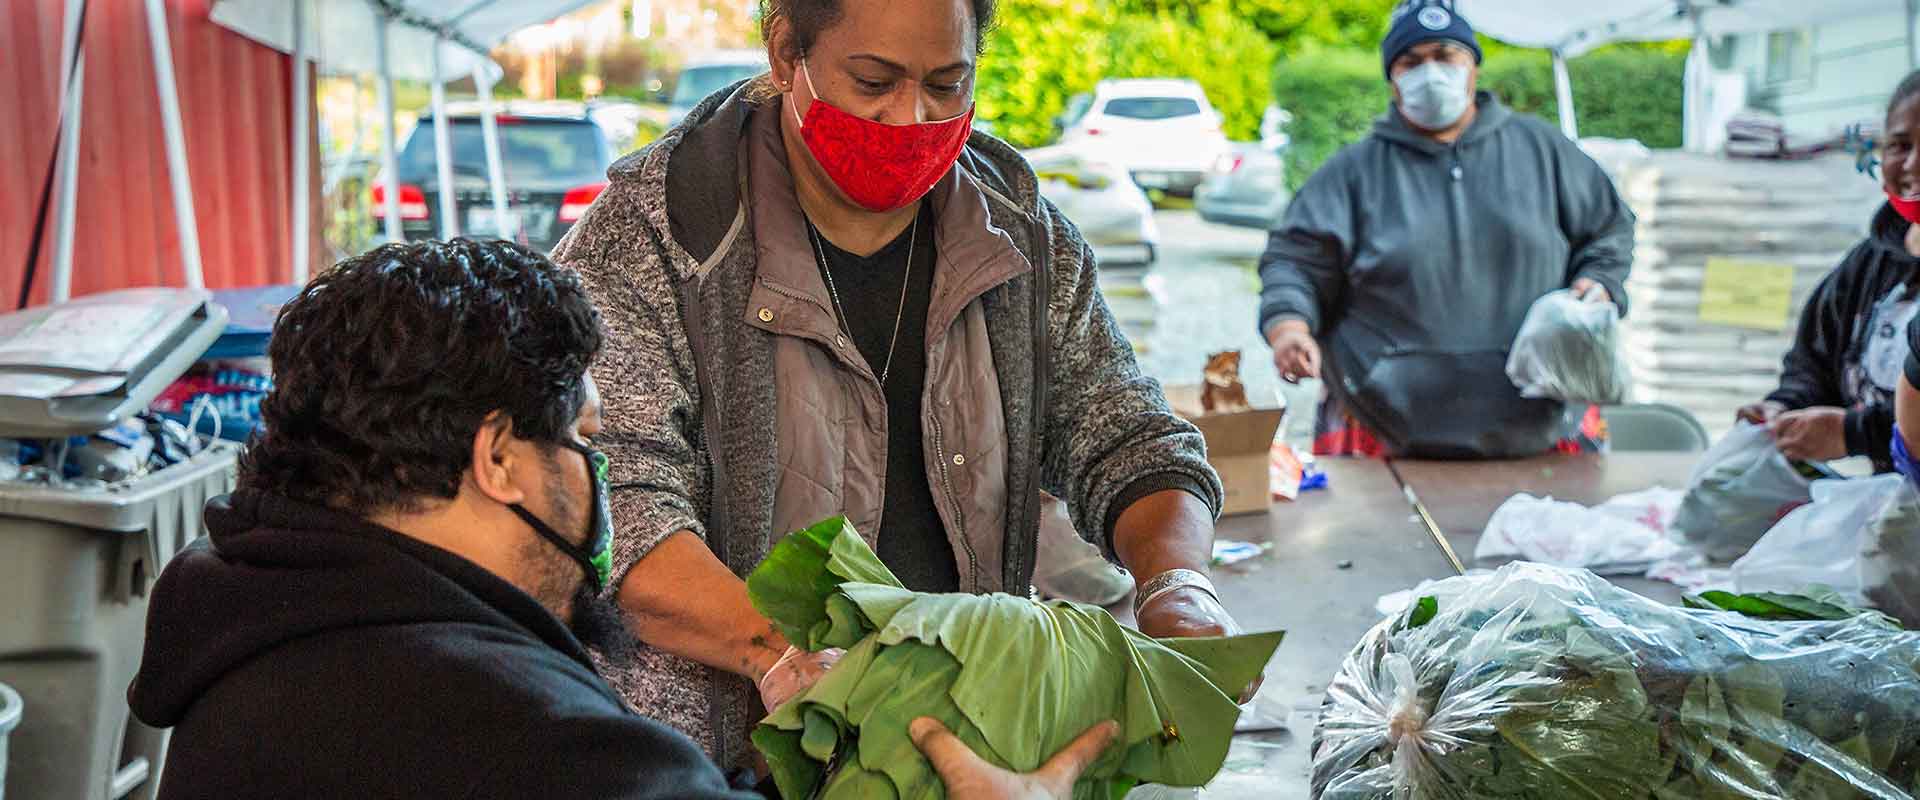 [Response & Recovery] People organizing a food drive with one person handing another person a large head of greens.